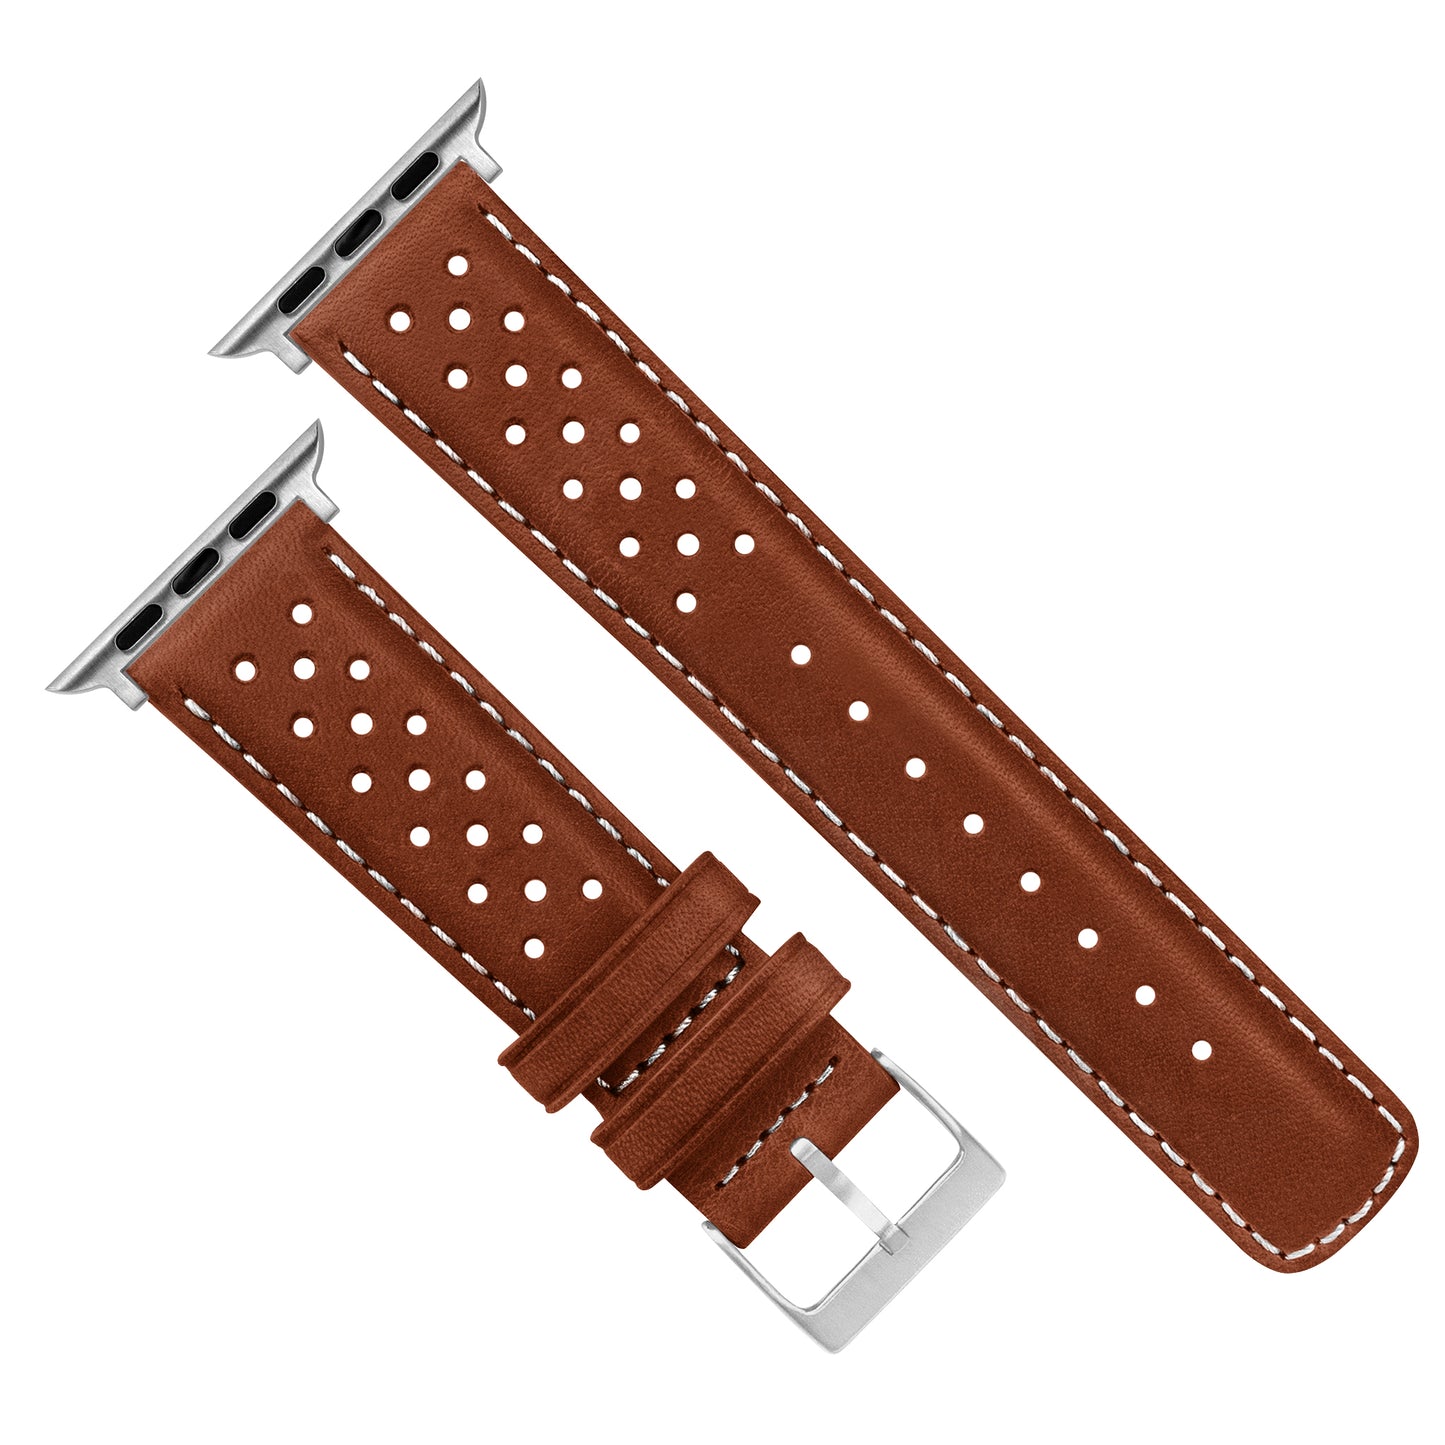 Apple Watch Chocolate Brown Linen Stitch Racing Horween Leather Watch Band